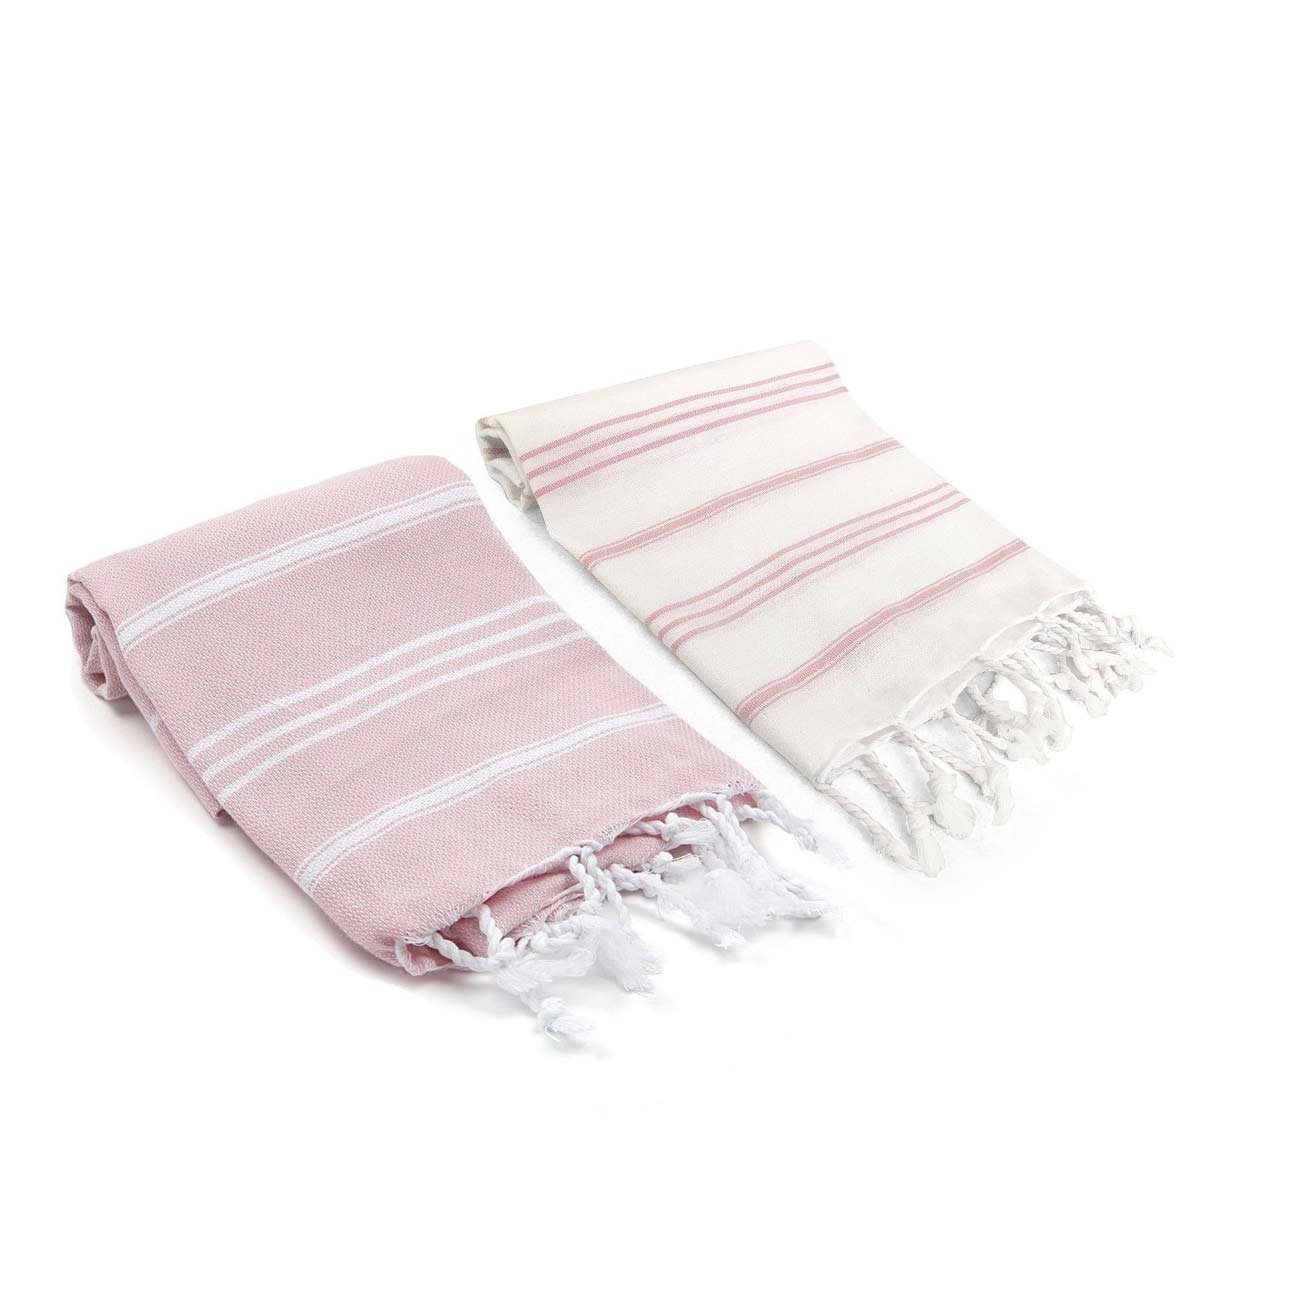 Blush Turkish Towel set for the beach with besties